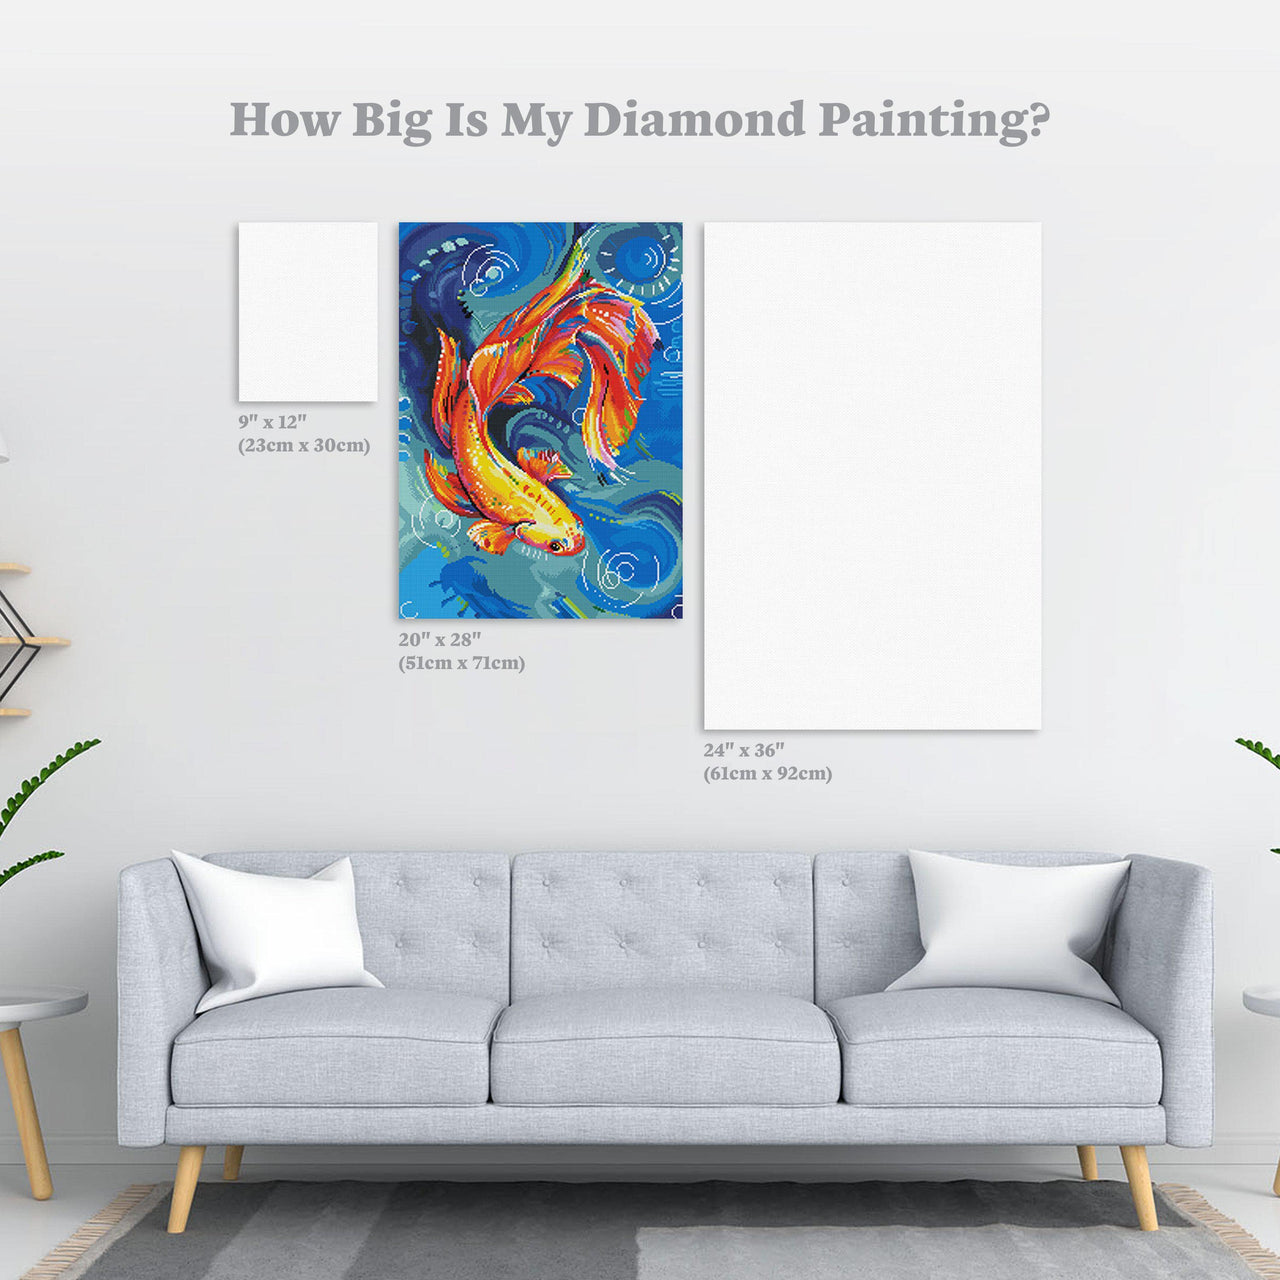 Diamond Painting Siamese Fighting Fish 20" x 28″ (51cm x 71cm) / Round with 37 Colors including 3 ABs